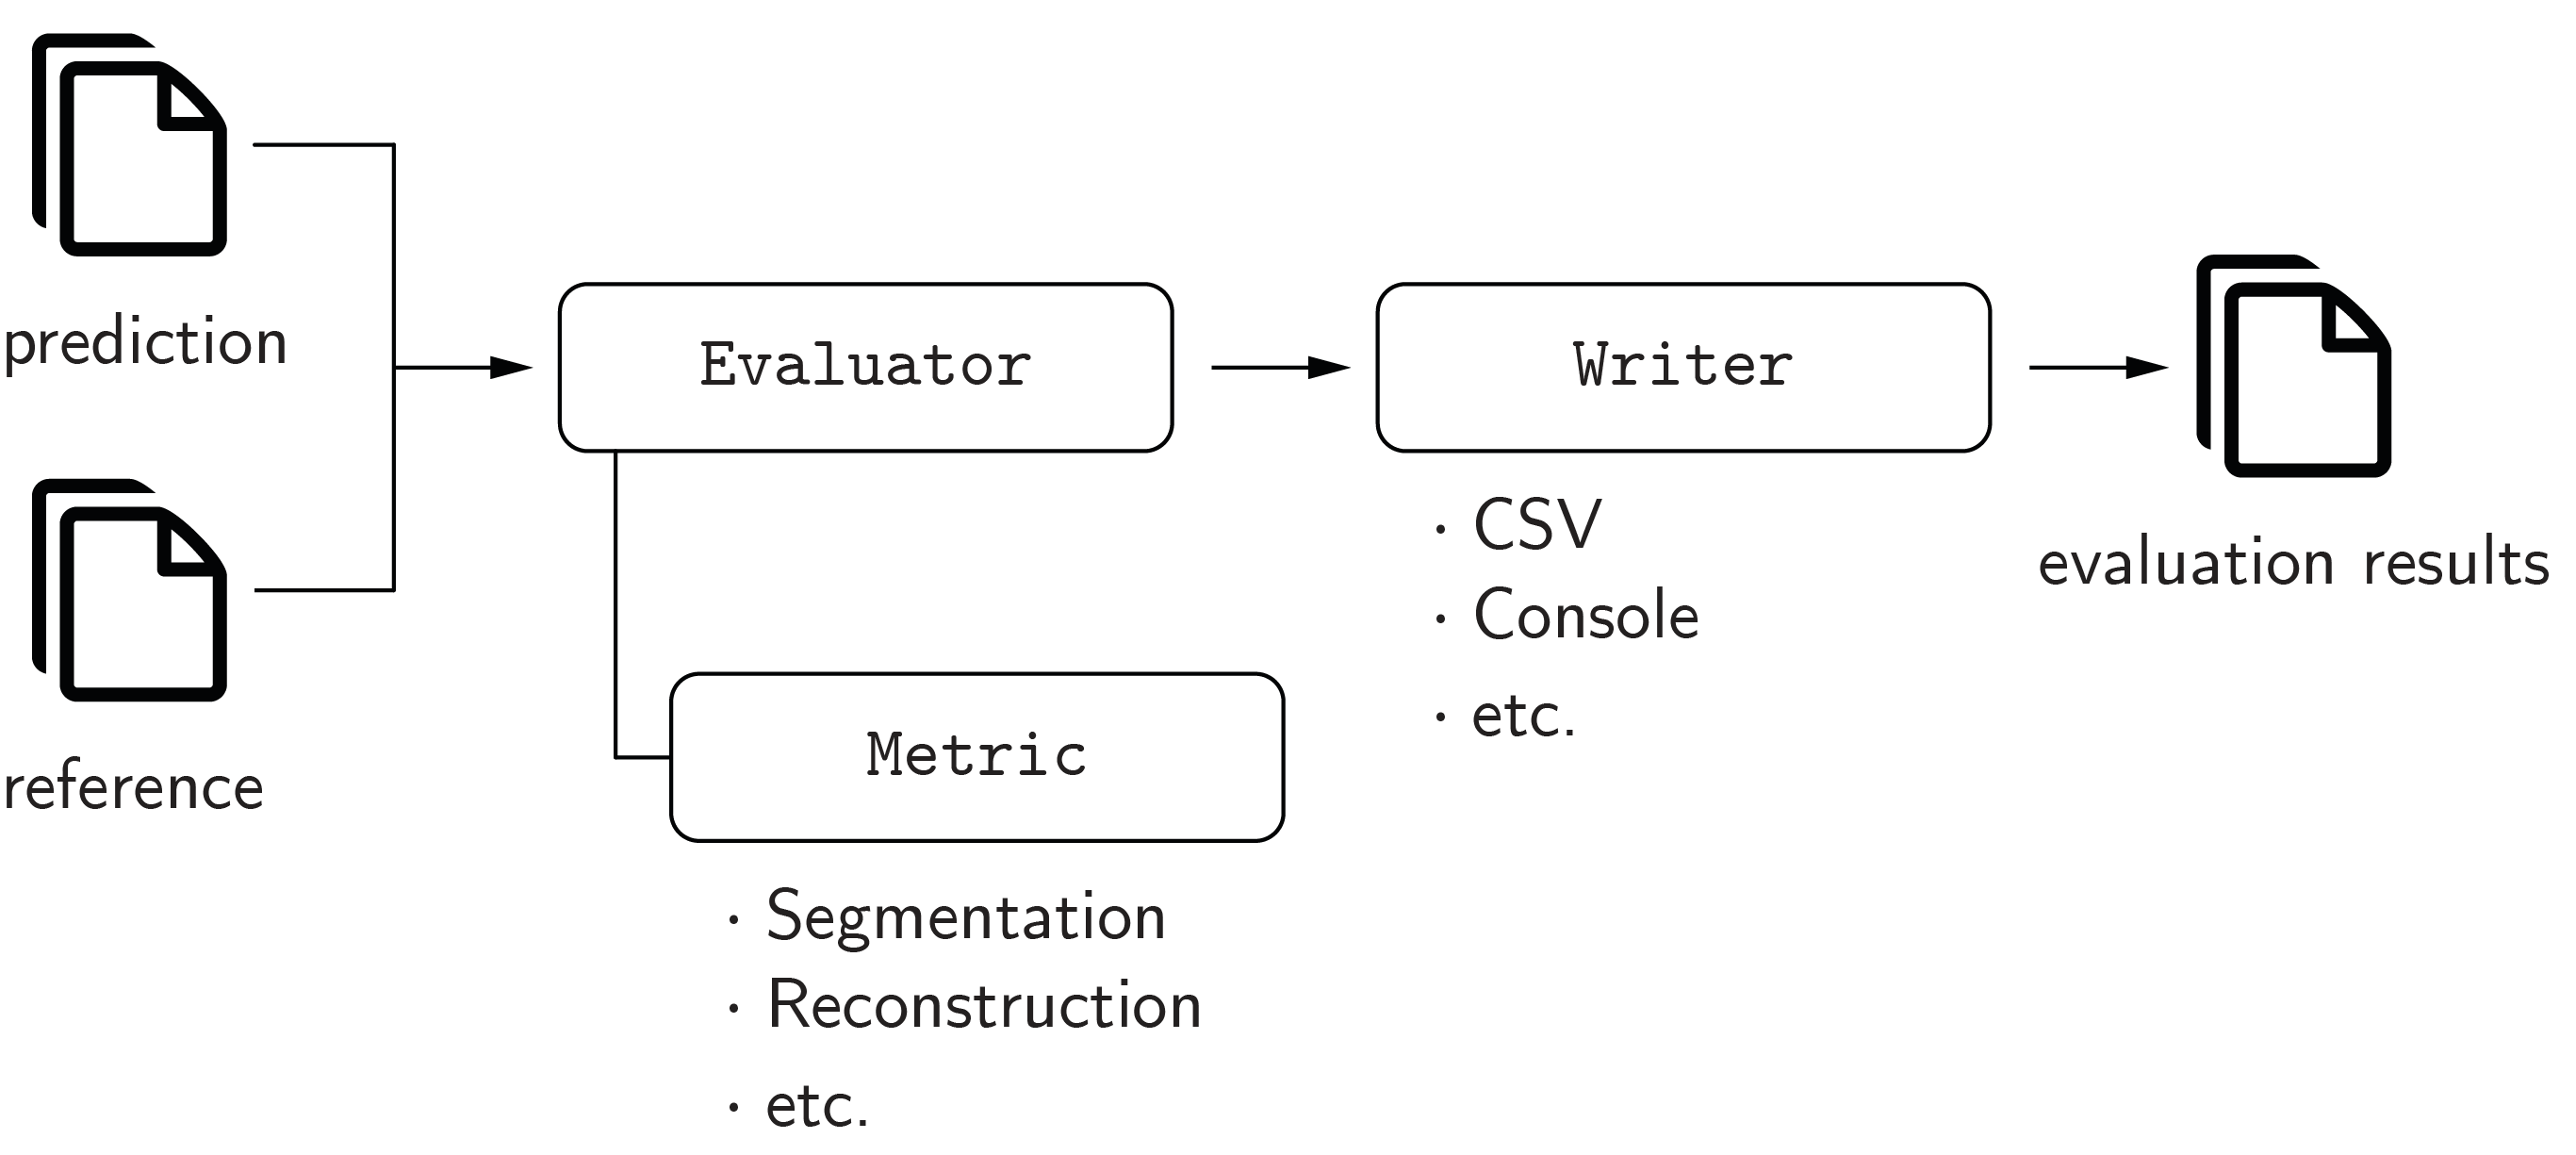 Overview of the evaluation package.